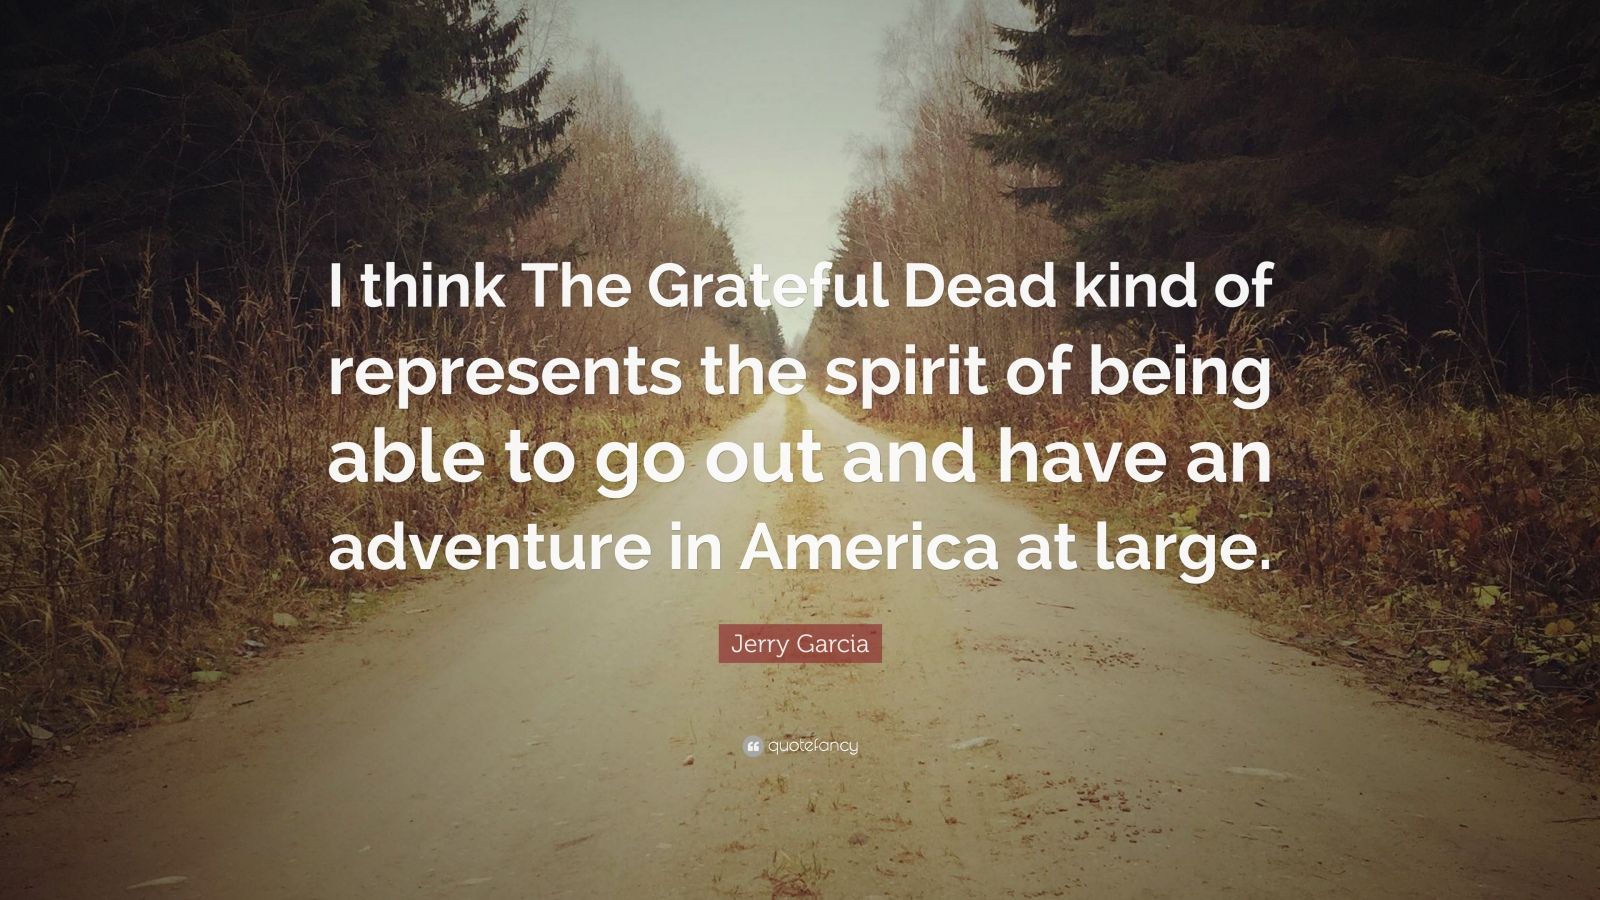 Jerry Garcia Quote: “I think The Grateful Dead kind of represents the